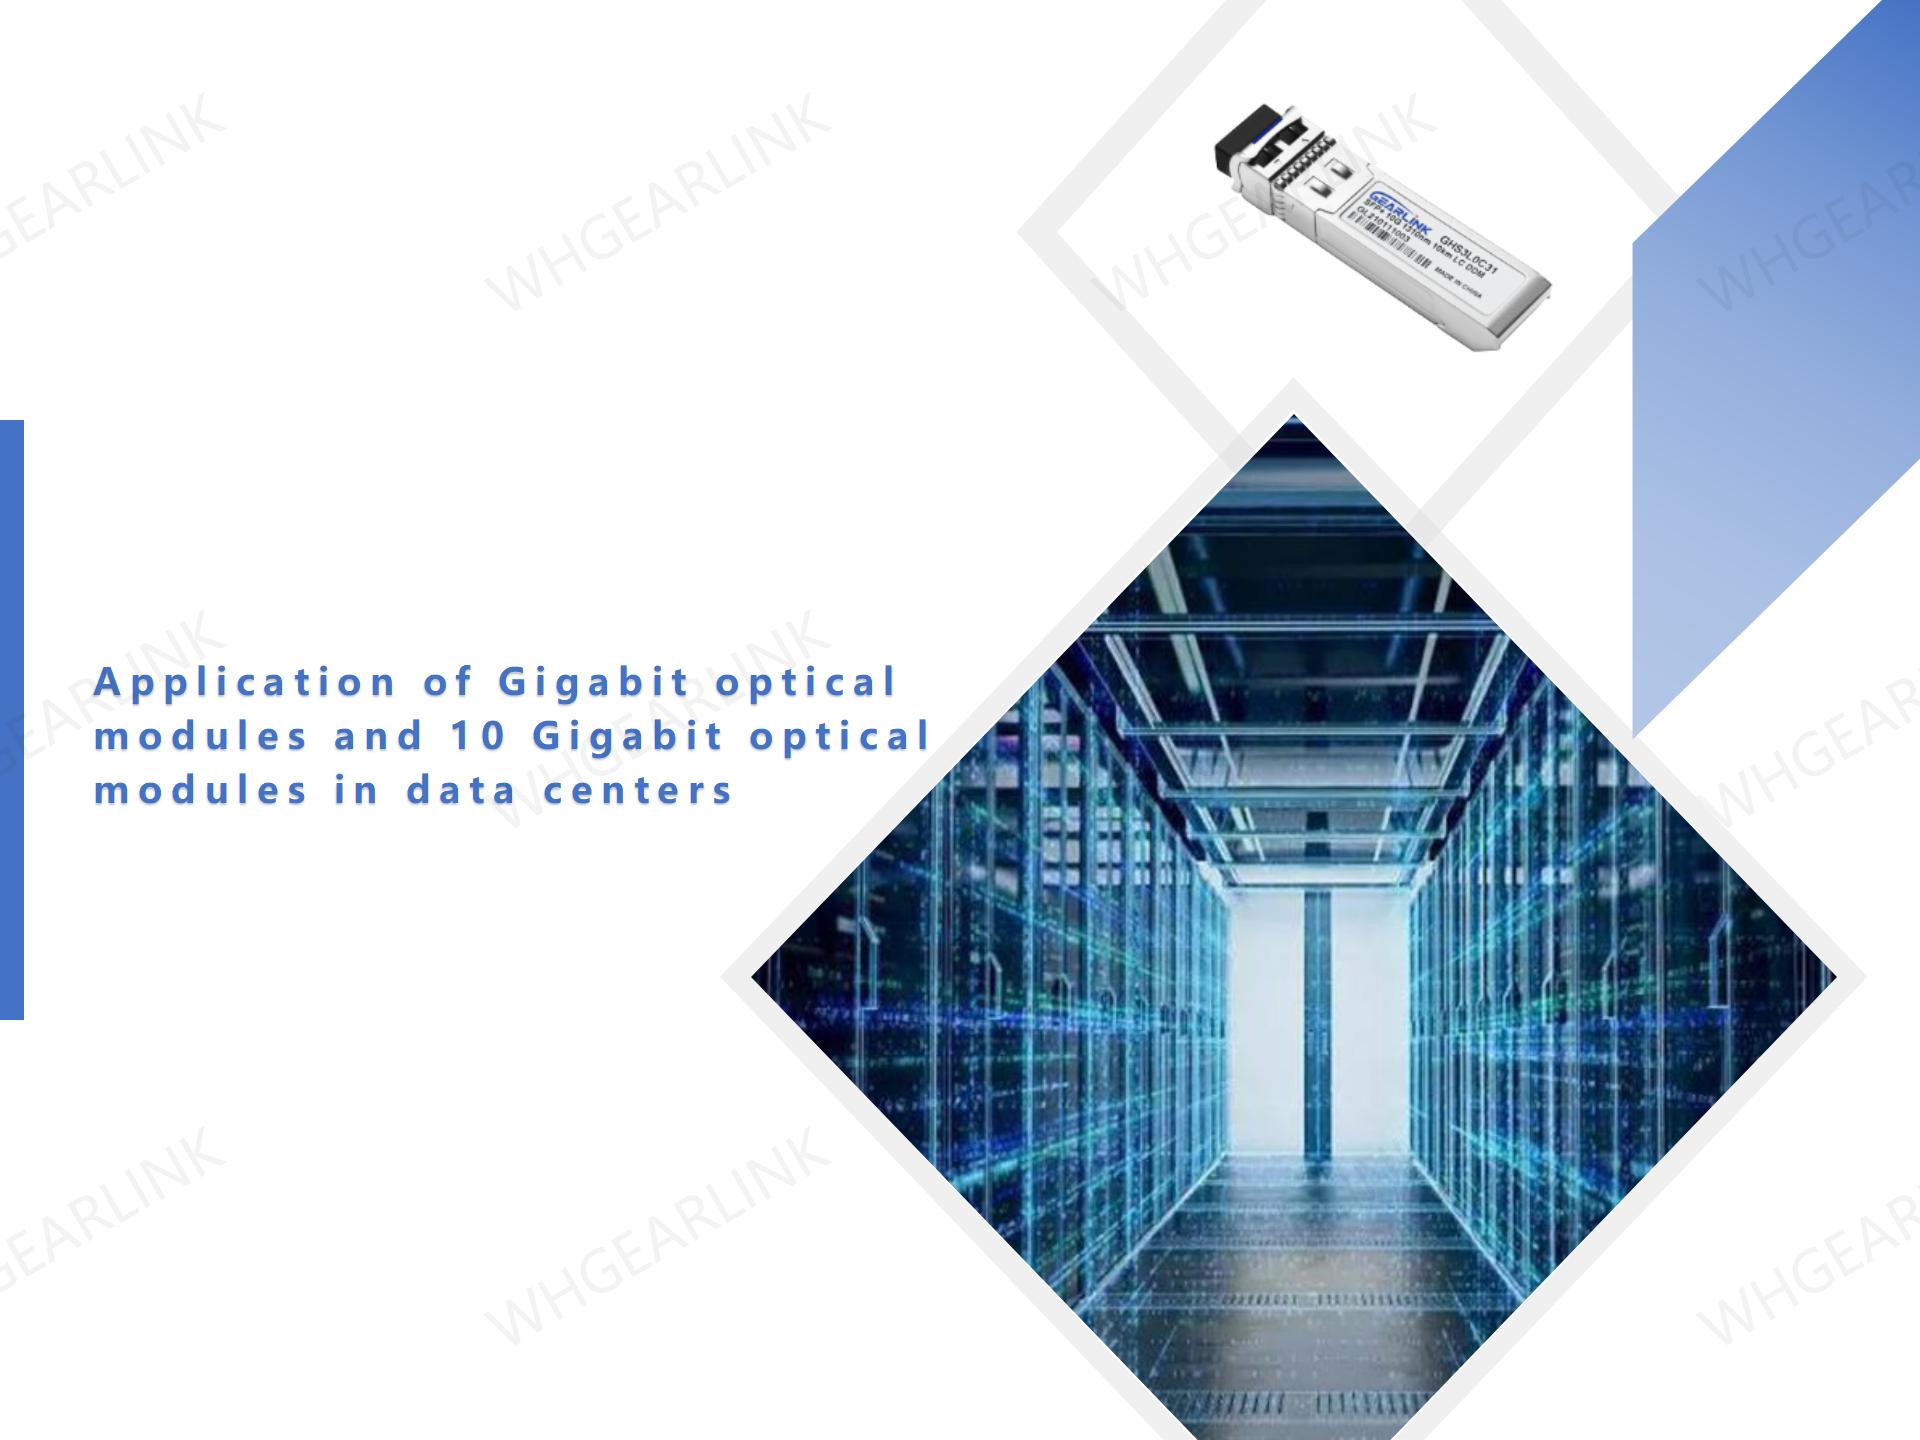 Application of Gigabit optical modules and 10 Gigabit optical modules in data centers